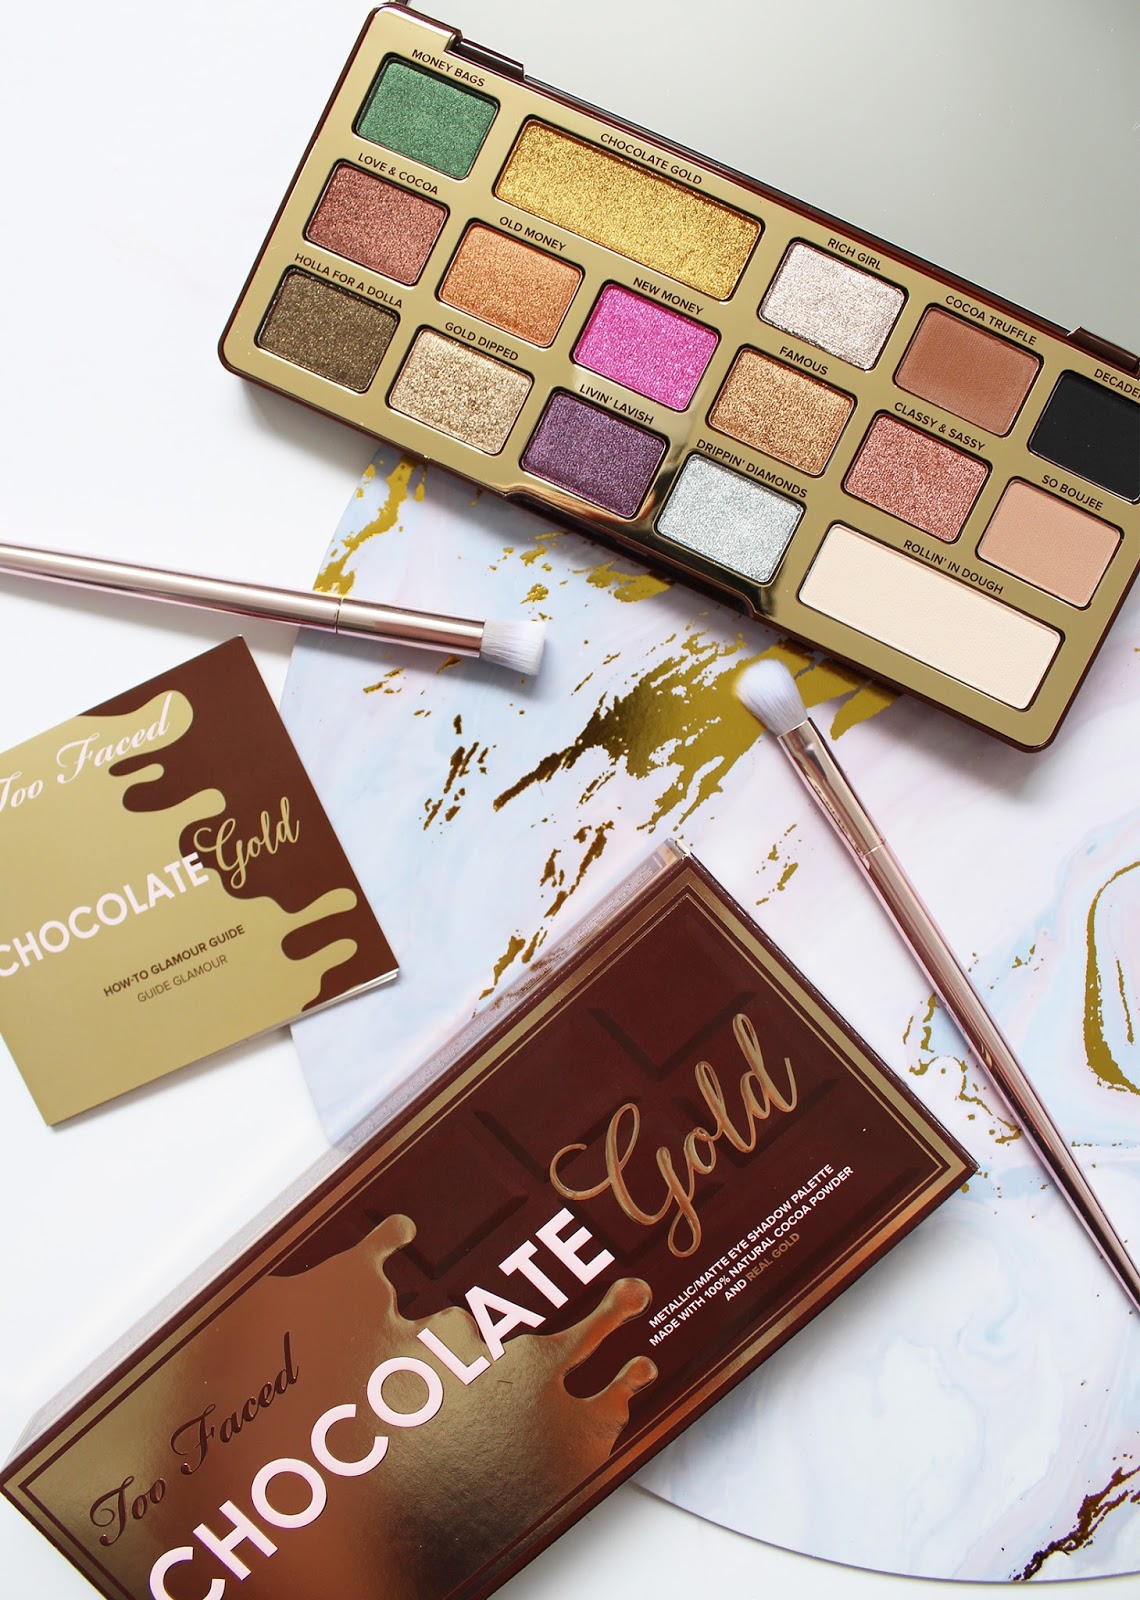 Too Faced Chocolate Gold Metallic Matte Eyeshadow Palette Review